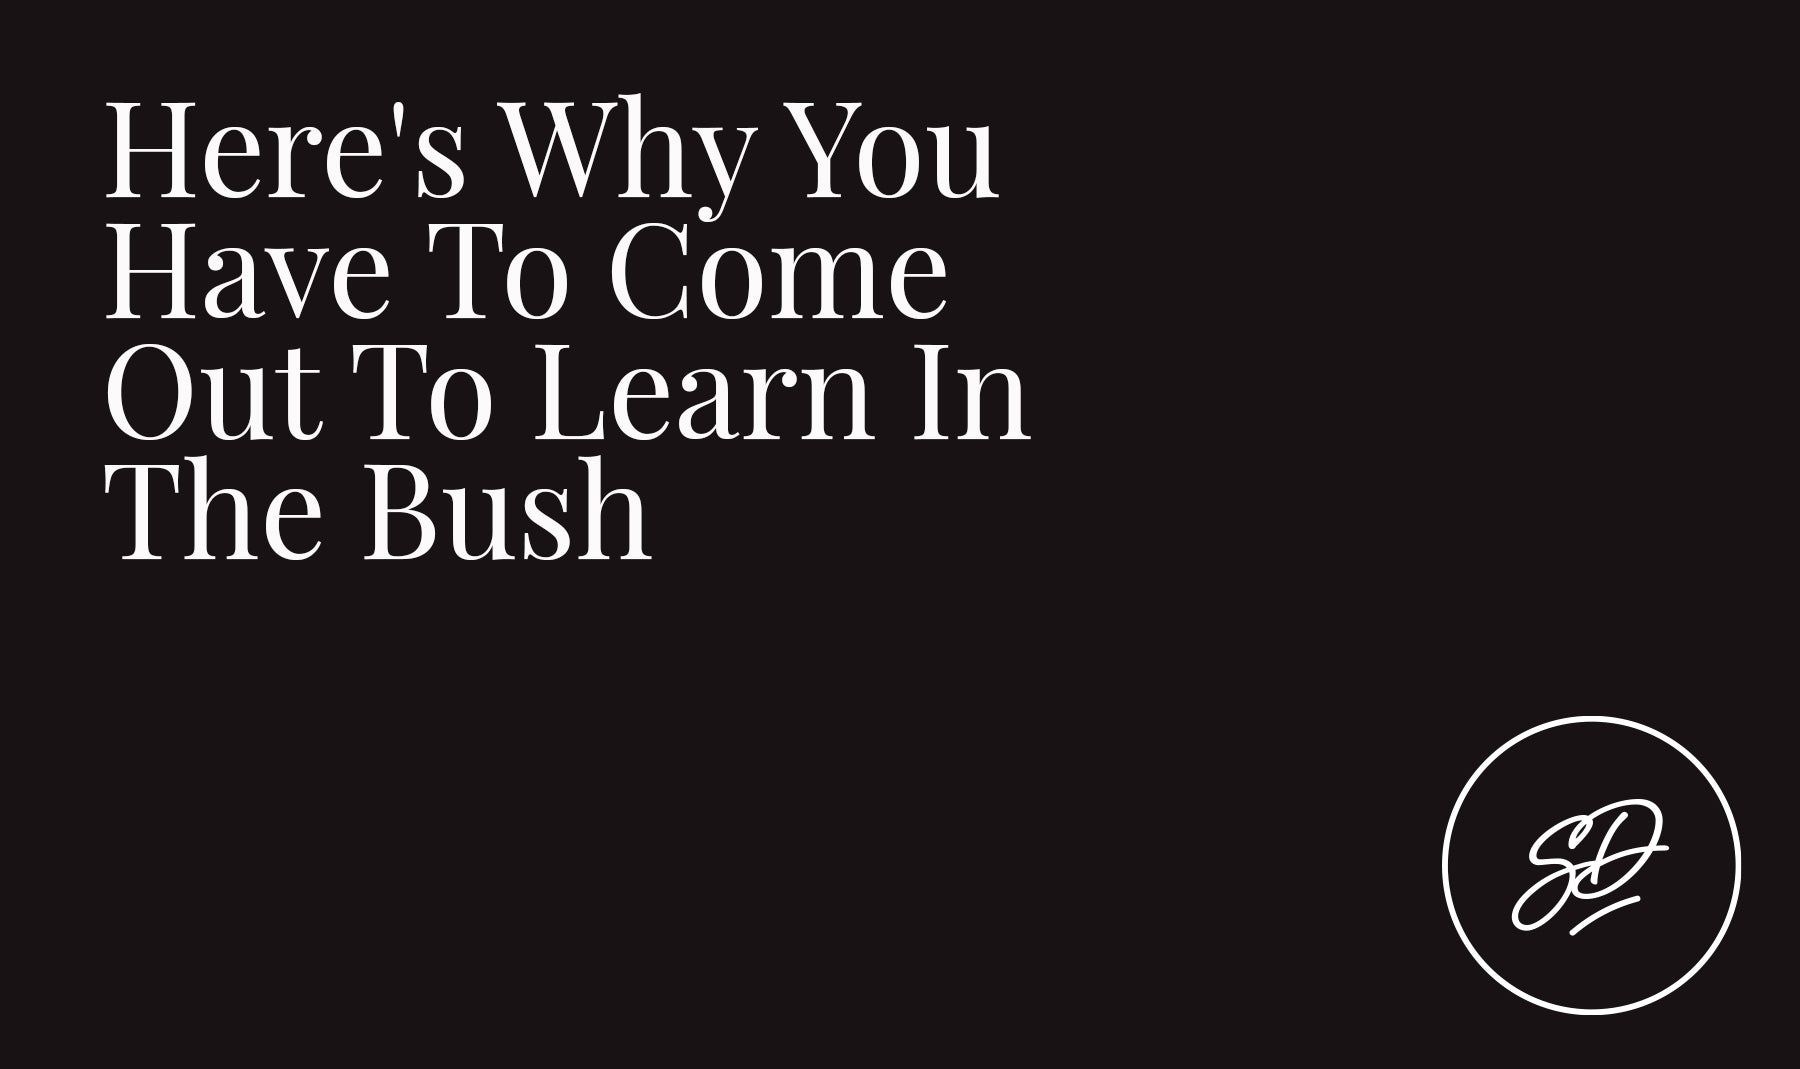 Here's Why You Have To Come Out To Learn In The Bush